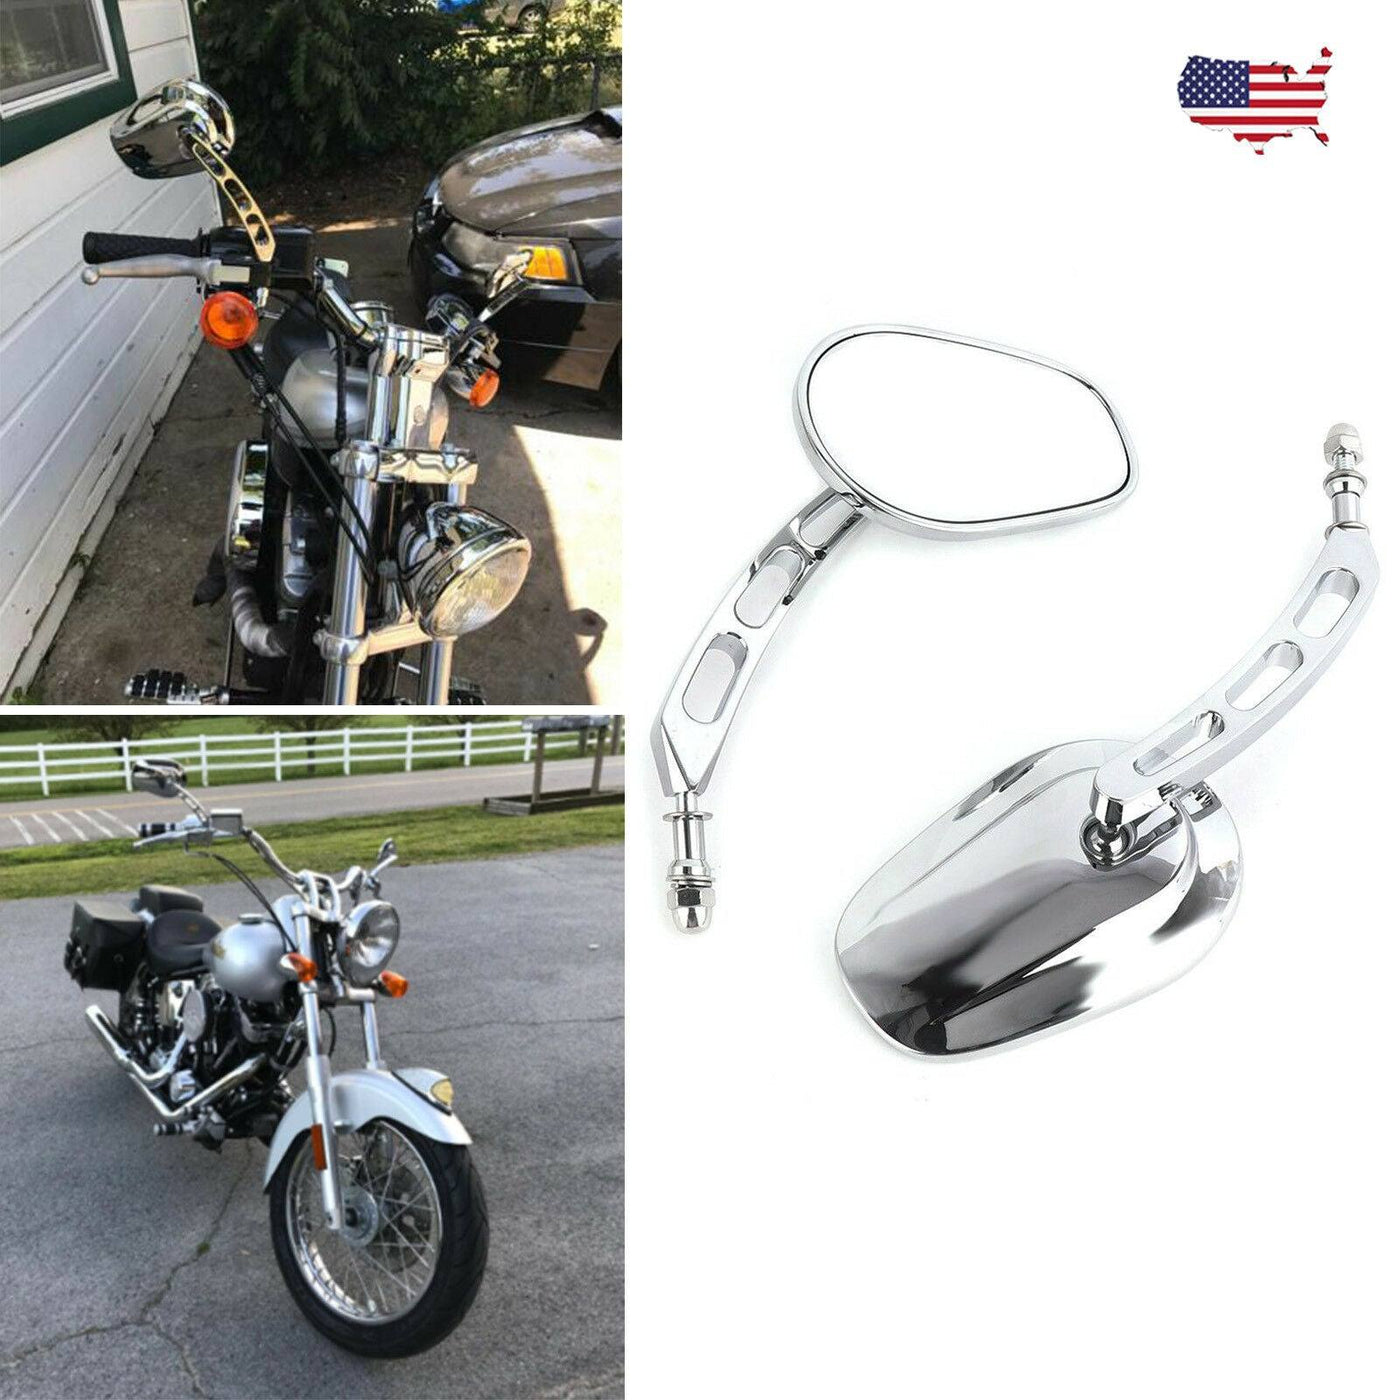 For Harley Davidson Electra Glide Classic Chrome Rear View Side Mirrors Custom - Moto Life Products